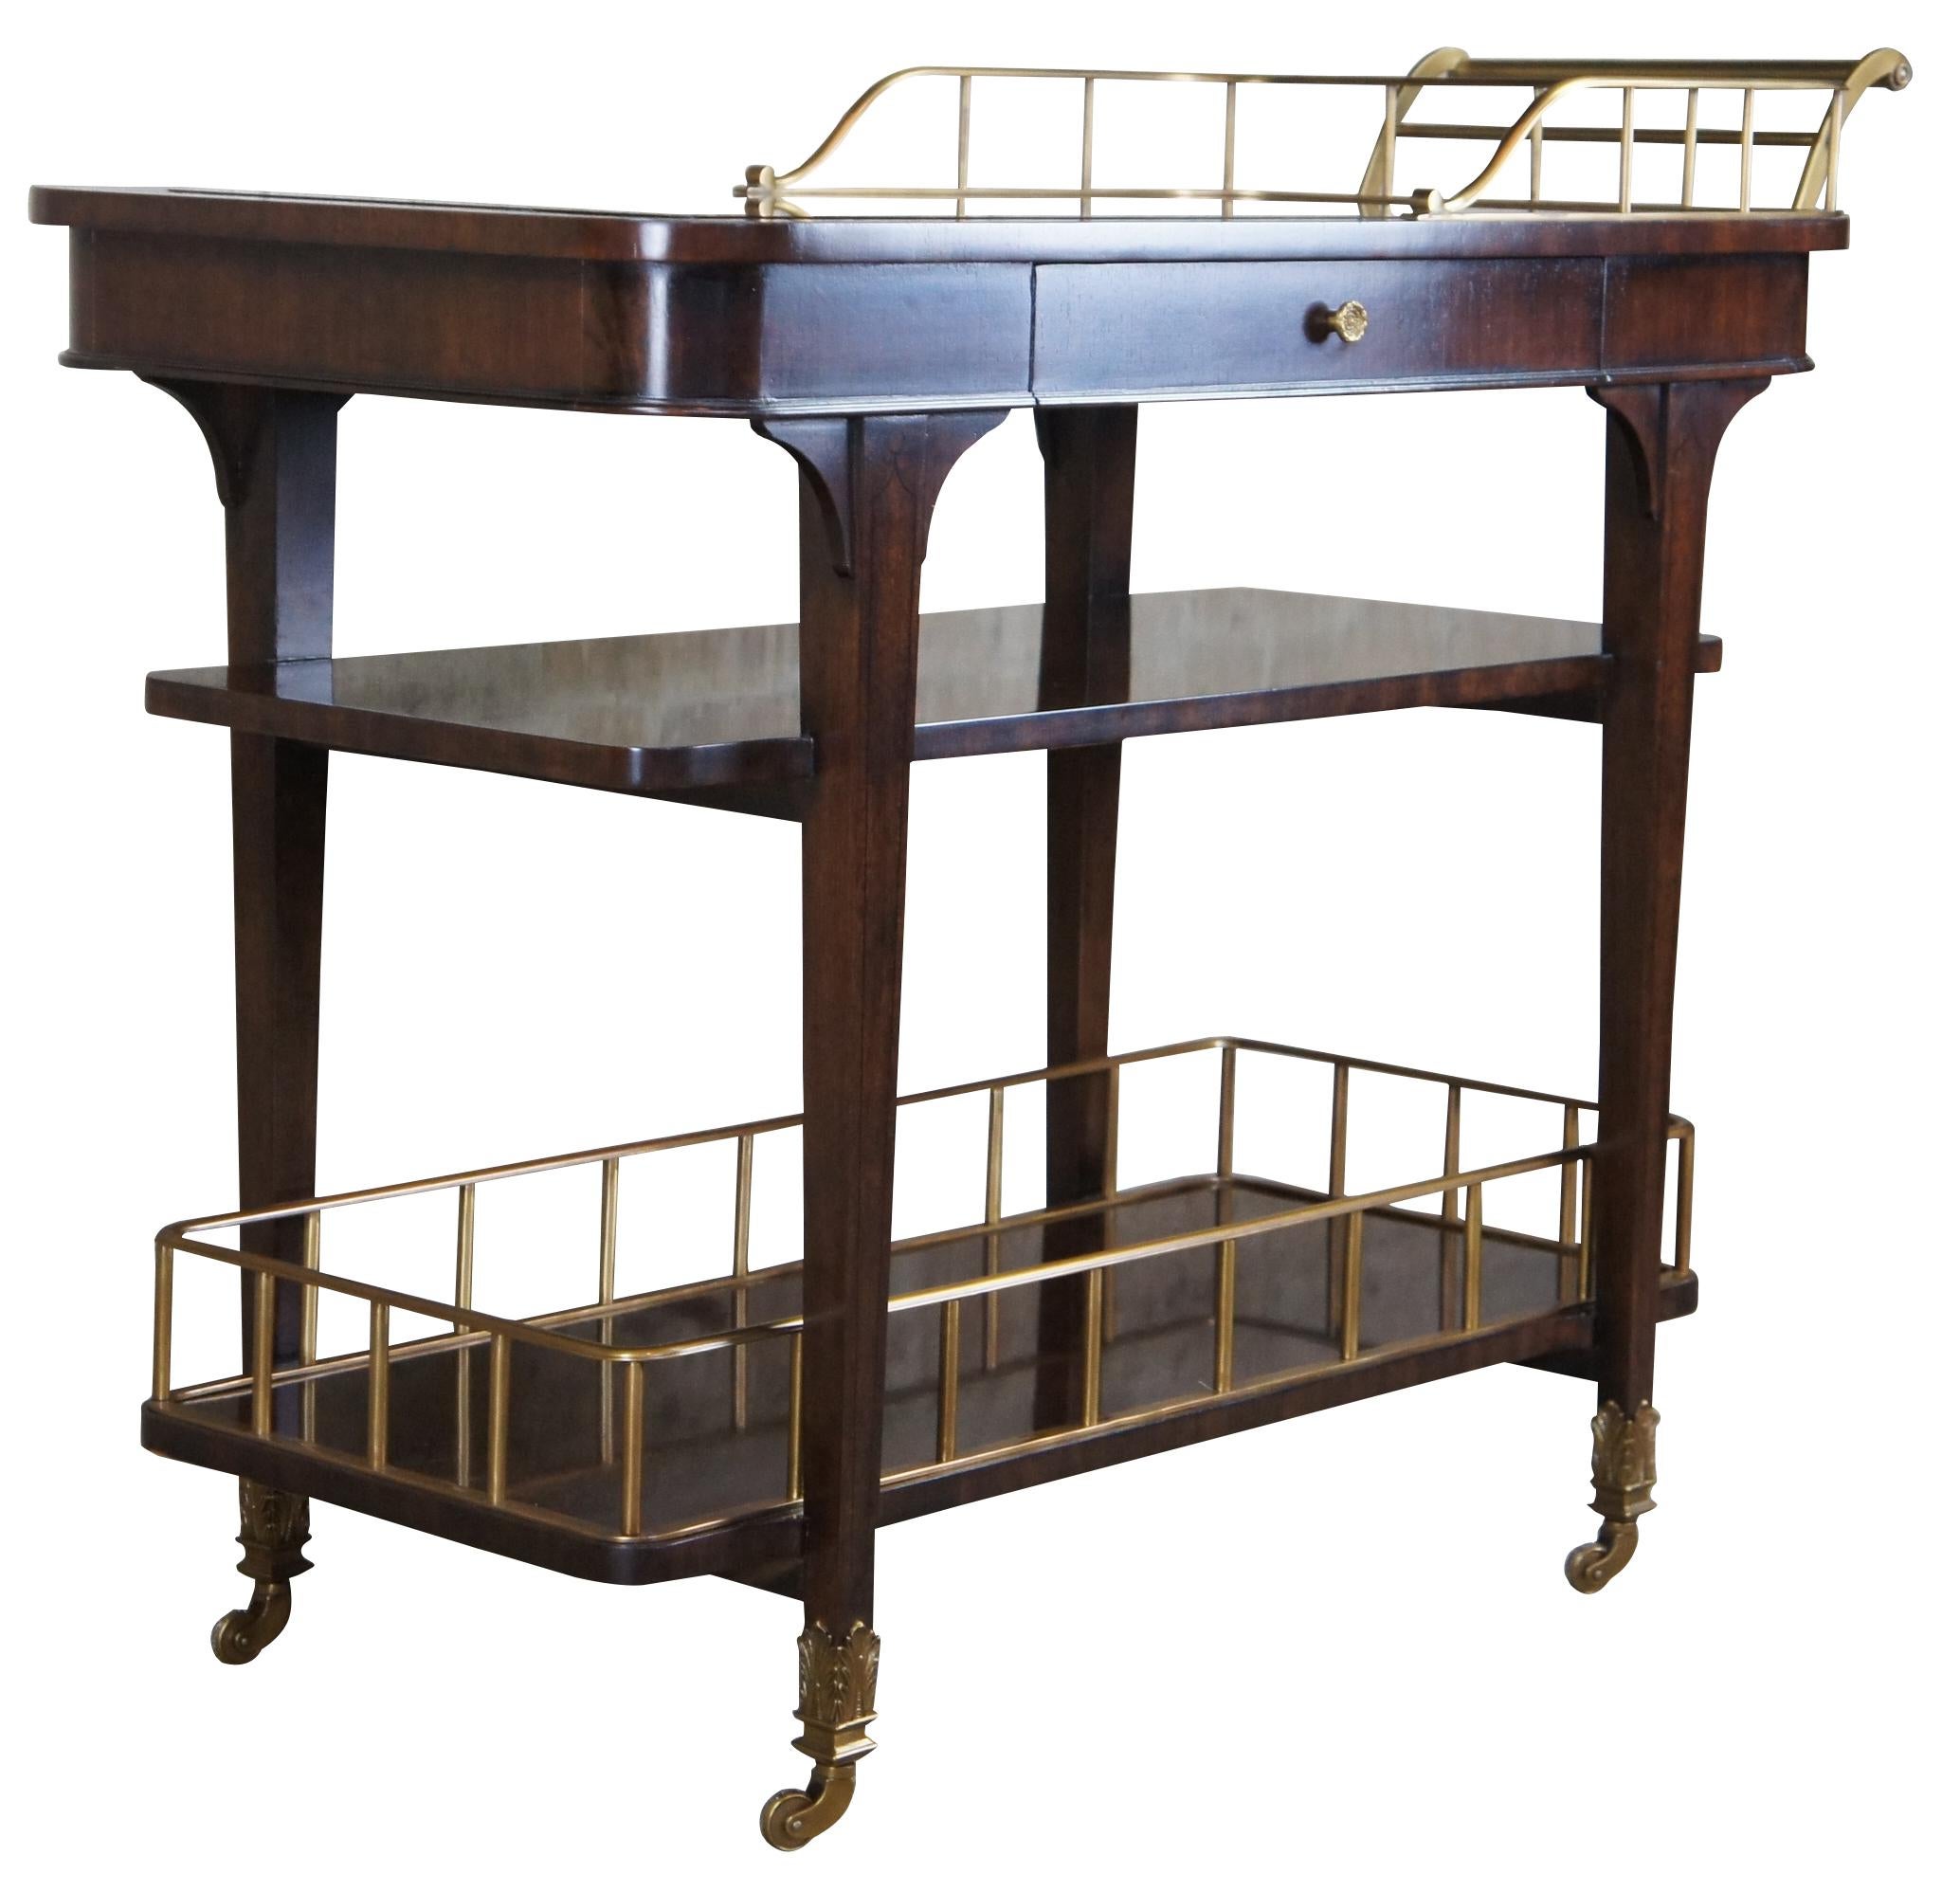 Three tier Henredon Furniture bar cart. Made from premium Mahoni and Gemelina wood, and Walnut veneers; and featuring brass galleries, mirrored top, lined accessories drawer, and swivel castors.

Measures: 43.5